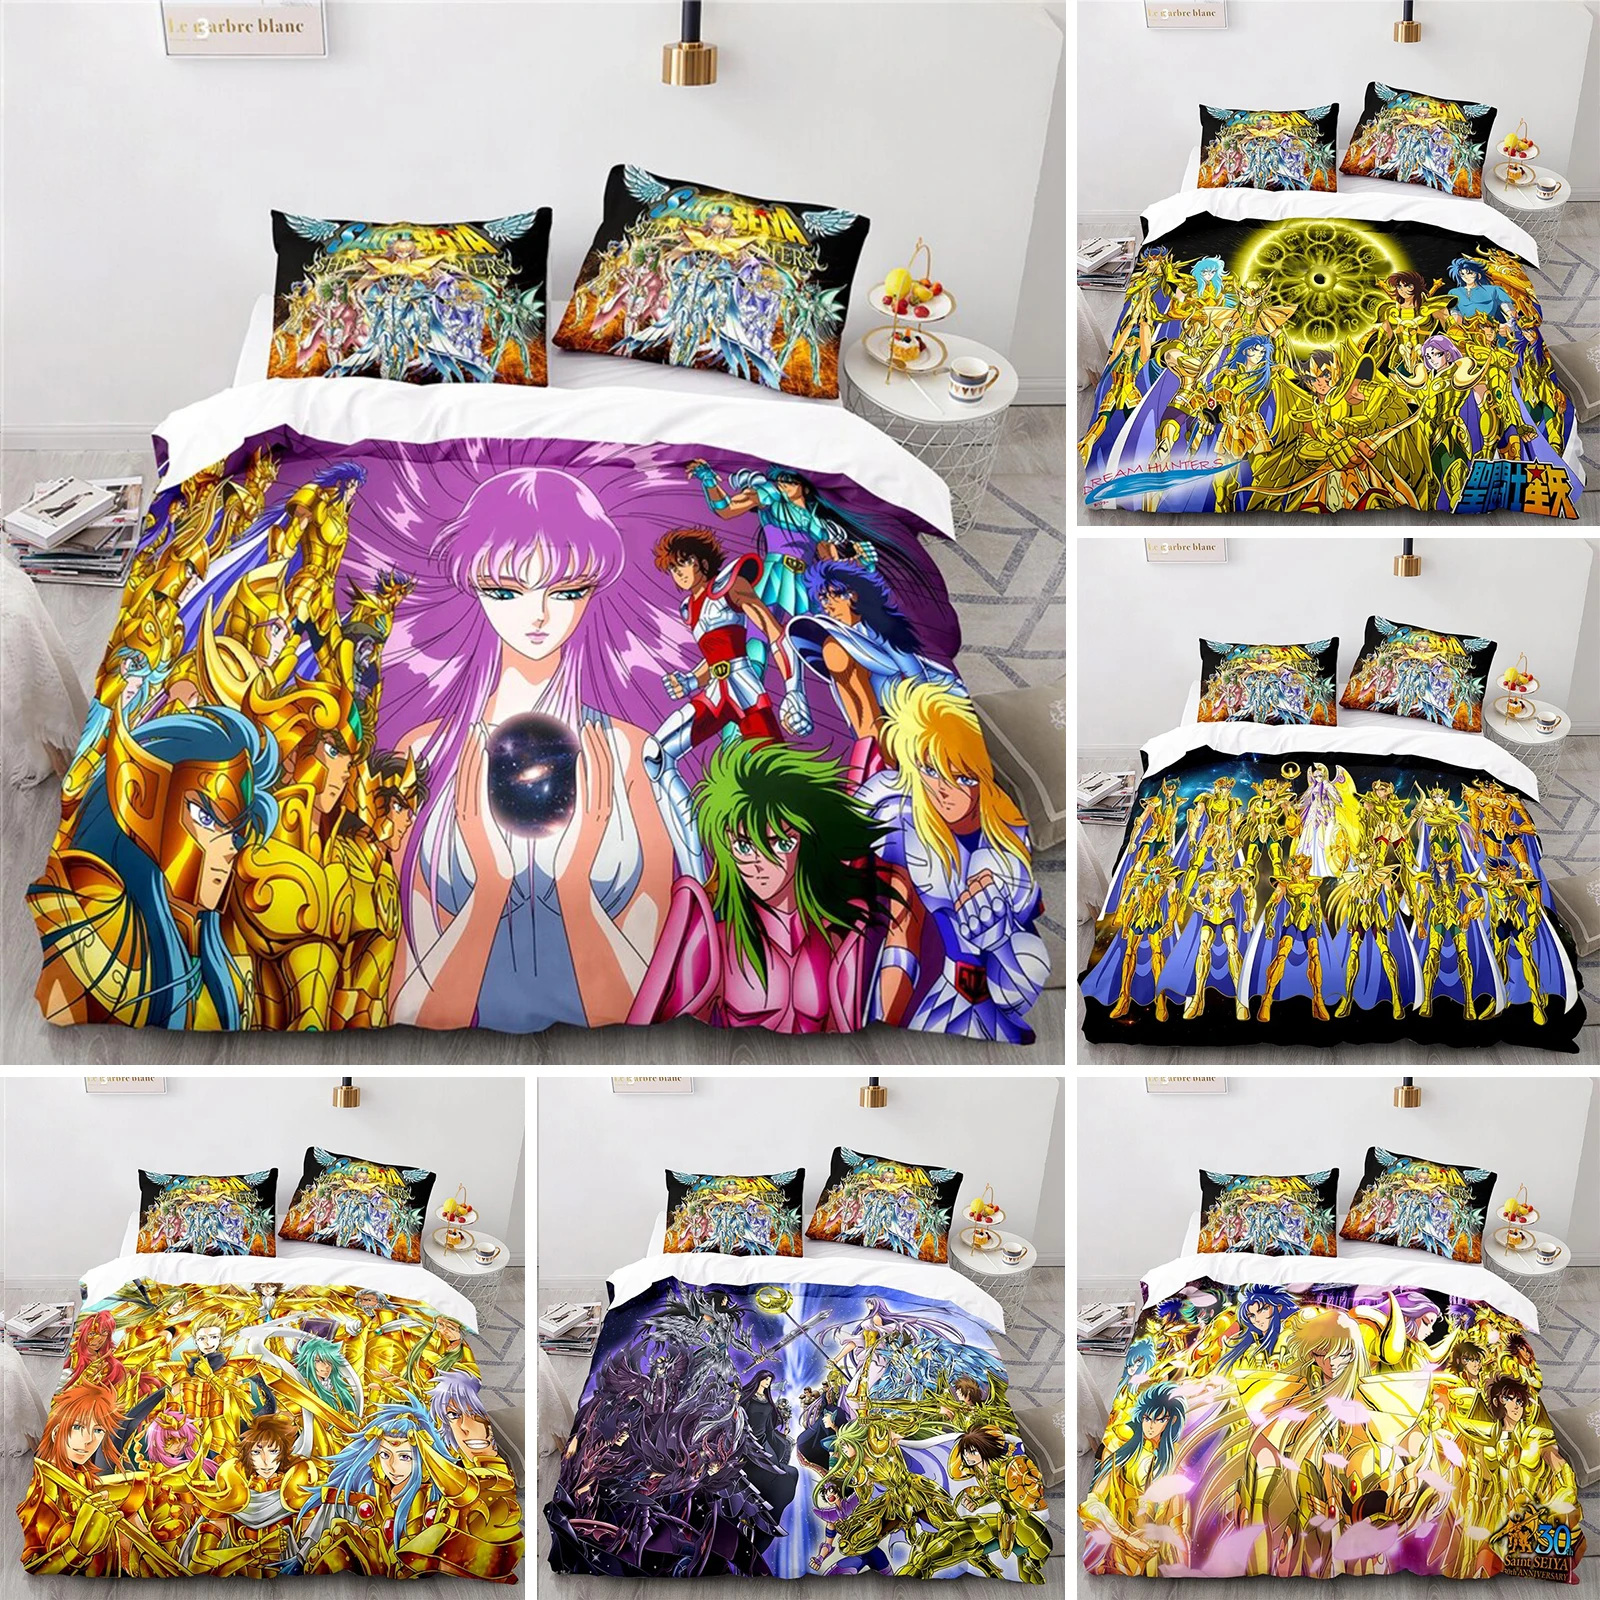 

Anime Saint Seiya Bedding Set Duvet Cover Bedroom Comforter Covers Single Twin King Size Quilt Cover Home Textile 2/3PCS